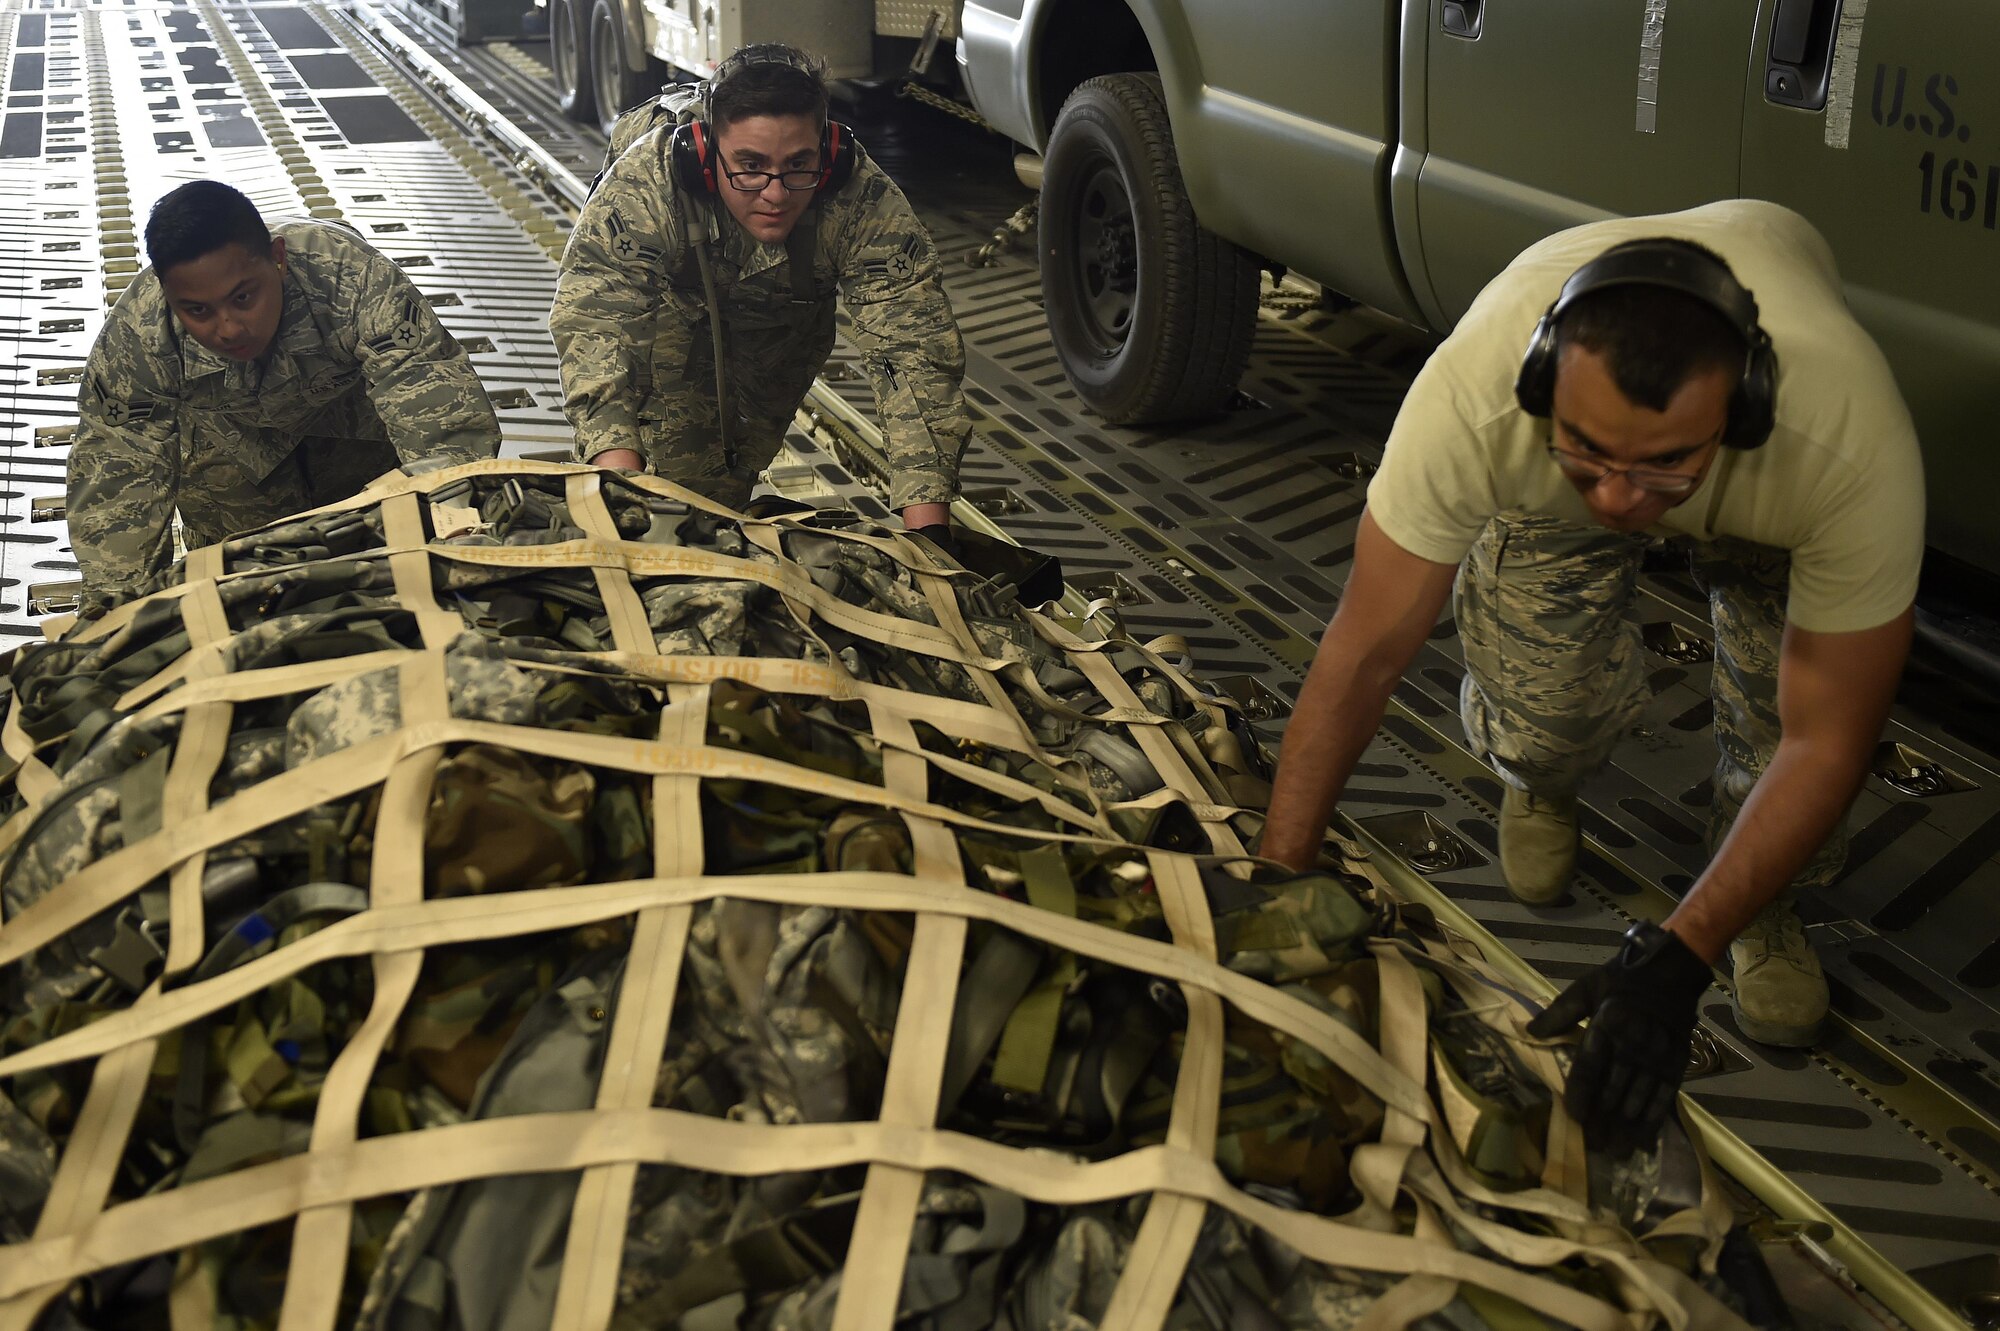 Aerial porters from the 321st Contingency Response Squadron position cargo on a C-17 Globemaster III aircraft during Exercise Saber Guardian ‘17 at Bezmer Air Base, Bulgaria, July 19, 2017.  Saber Guardian is a U.S. Army Europe-led exercise taking place in Bulgaria, Romania, and Hungary.  This exercise involves more than 25,000 service members from 22 allied and partner nations.  (U.S. Air Force Photo by Tech. Sgt. Liliana Moreno/Released)